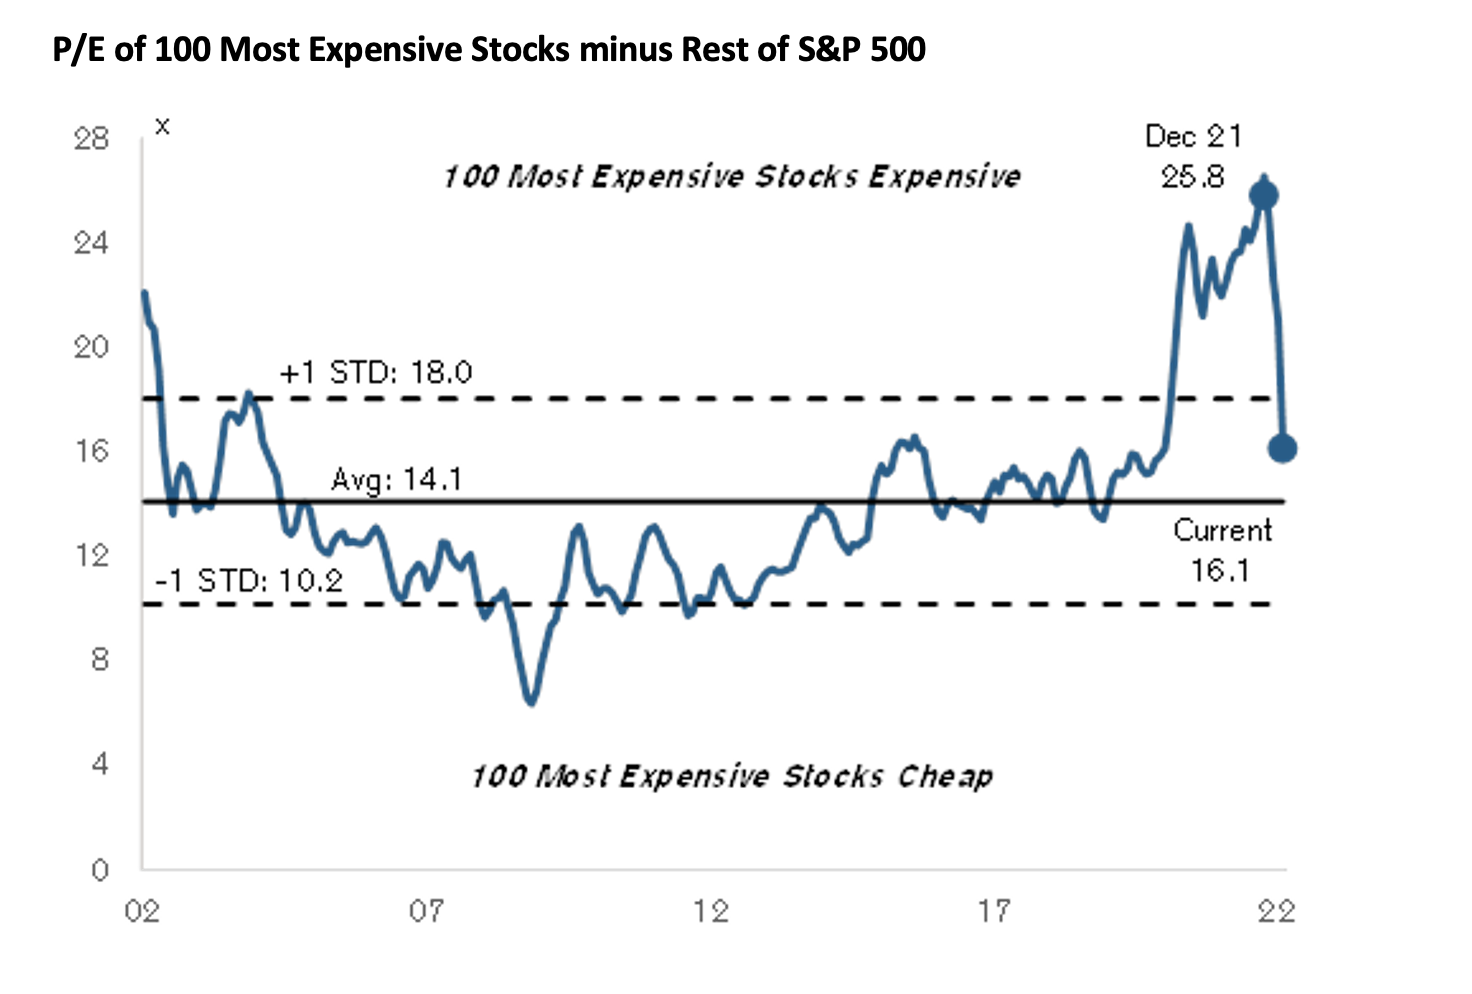 P/E of 100 Most Expensive Stocks minus Rest of S&P 500